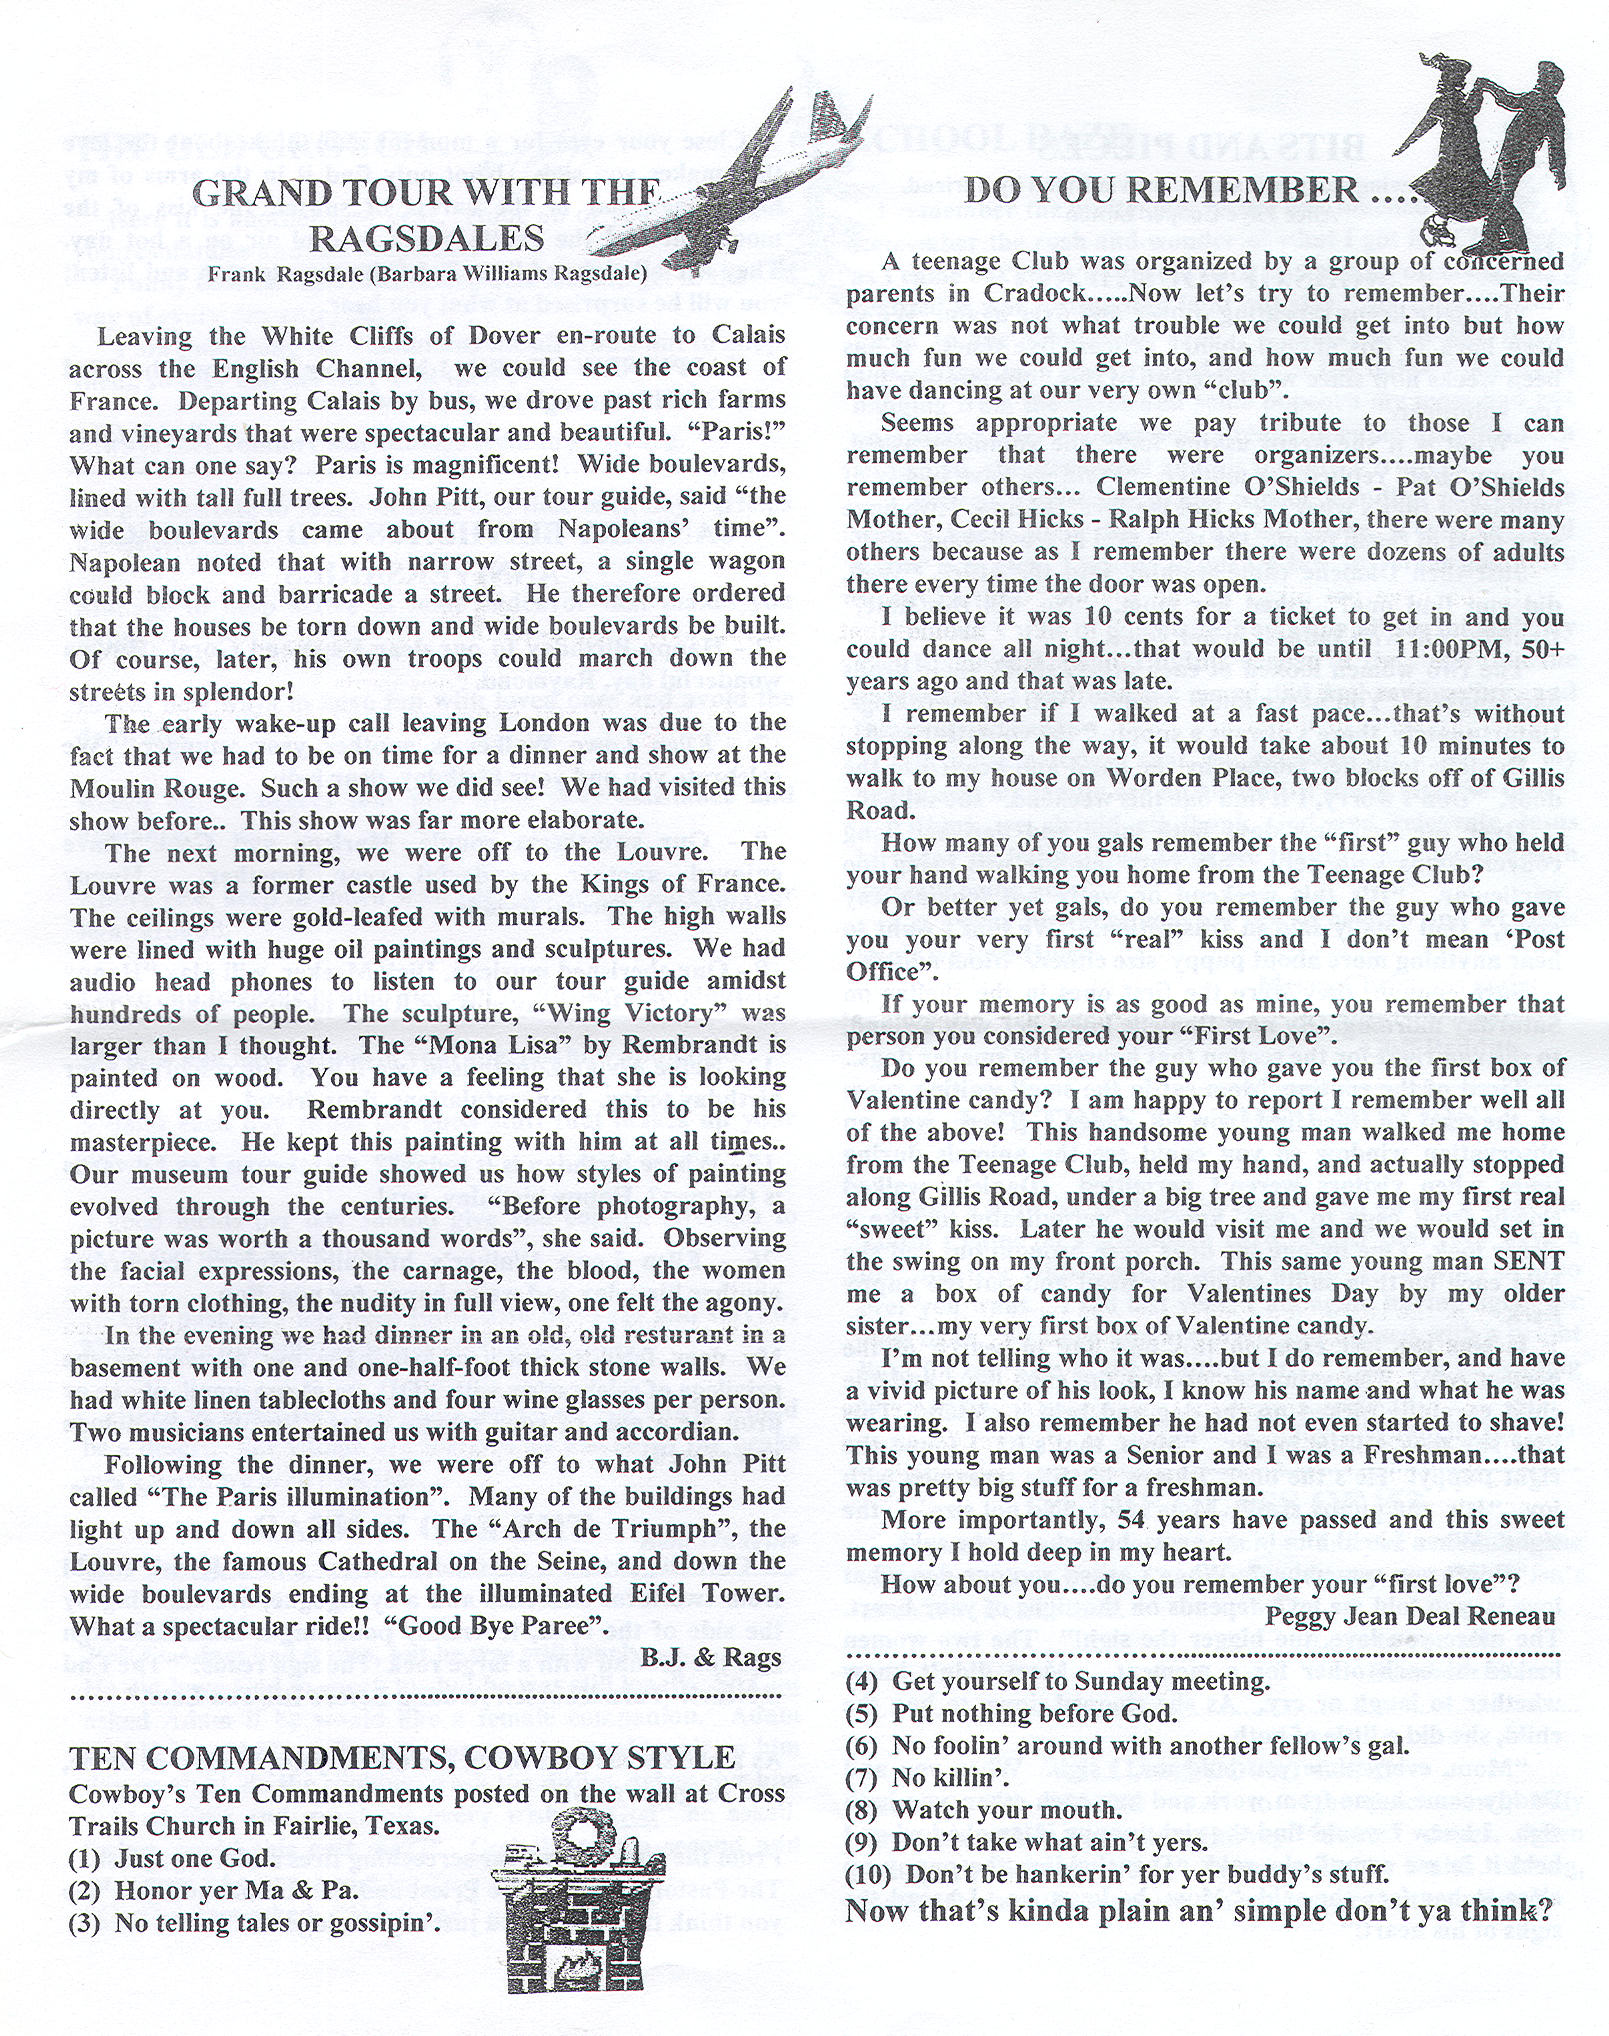 The Admiral - January 2007 - pg. 3